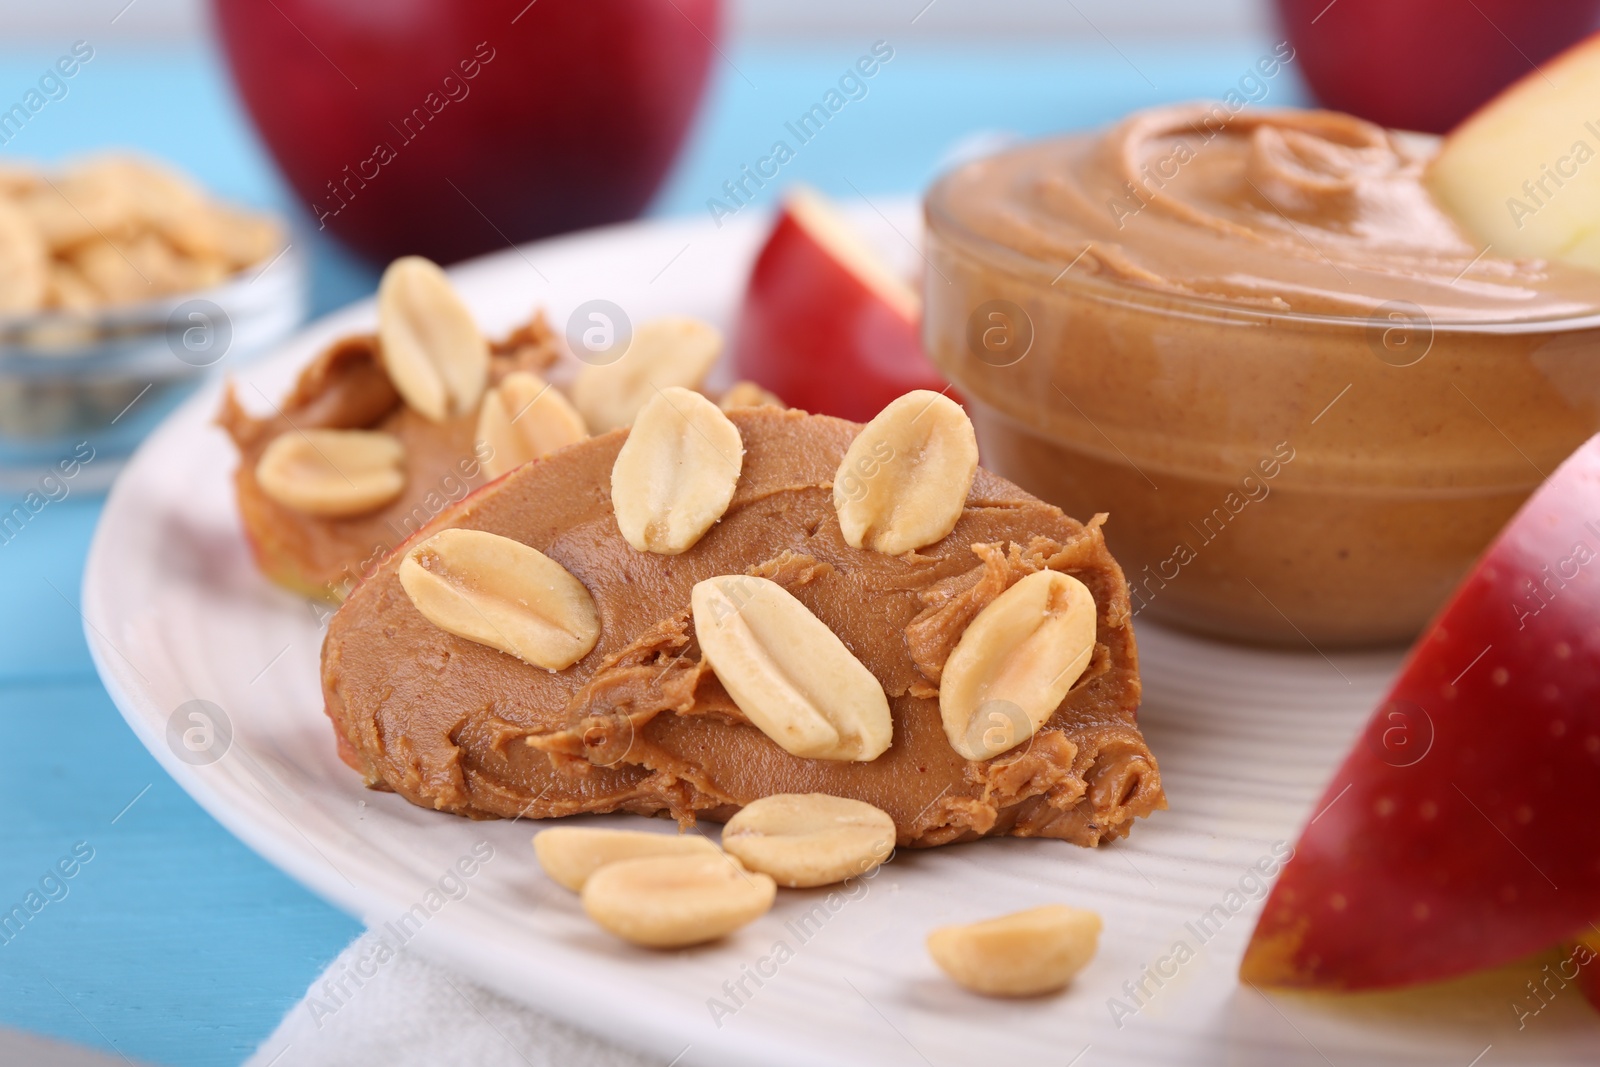 Photo of Slices of fresh apple with peanut butter and nuts on light blue table, closeup